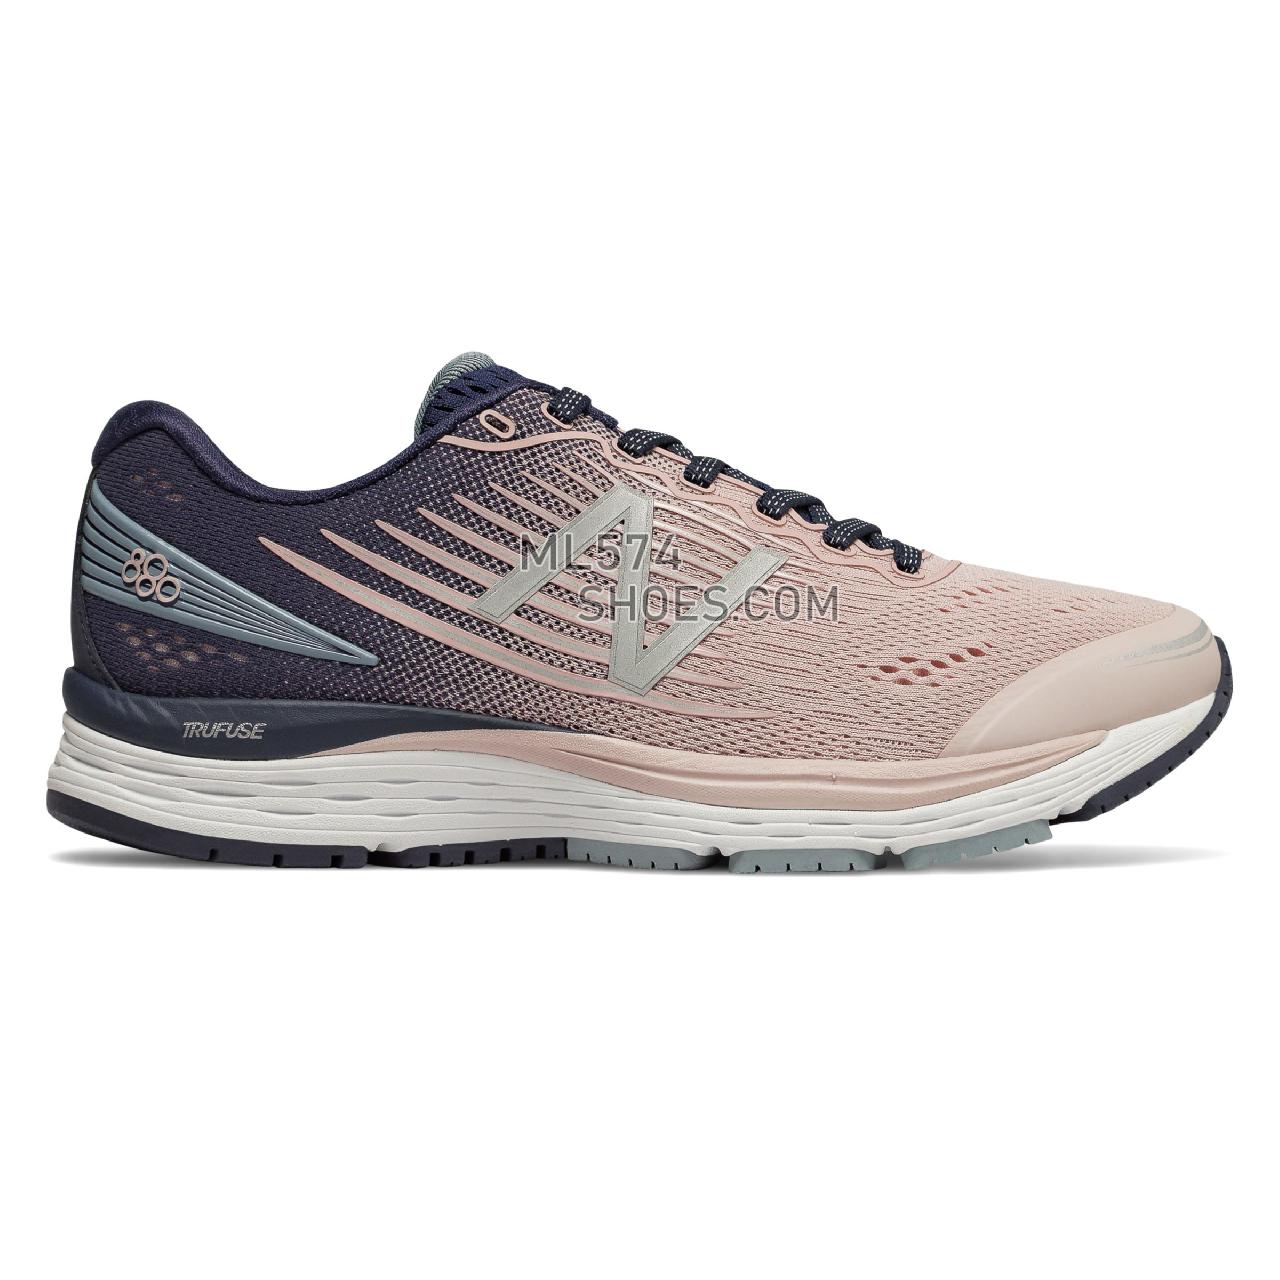 New Balance 880v8 - Women's 880 - Running Conch Shell with Pigment - W880HP8